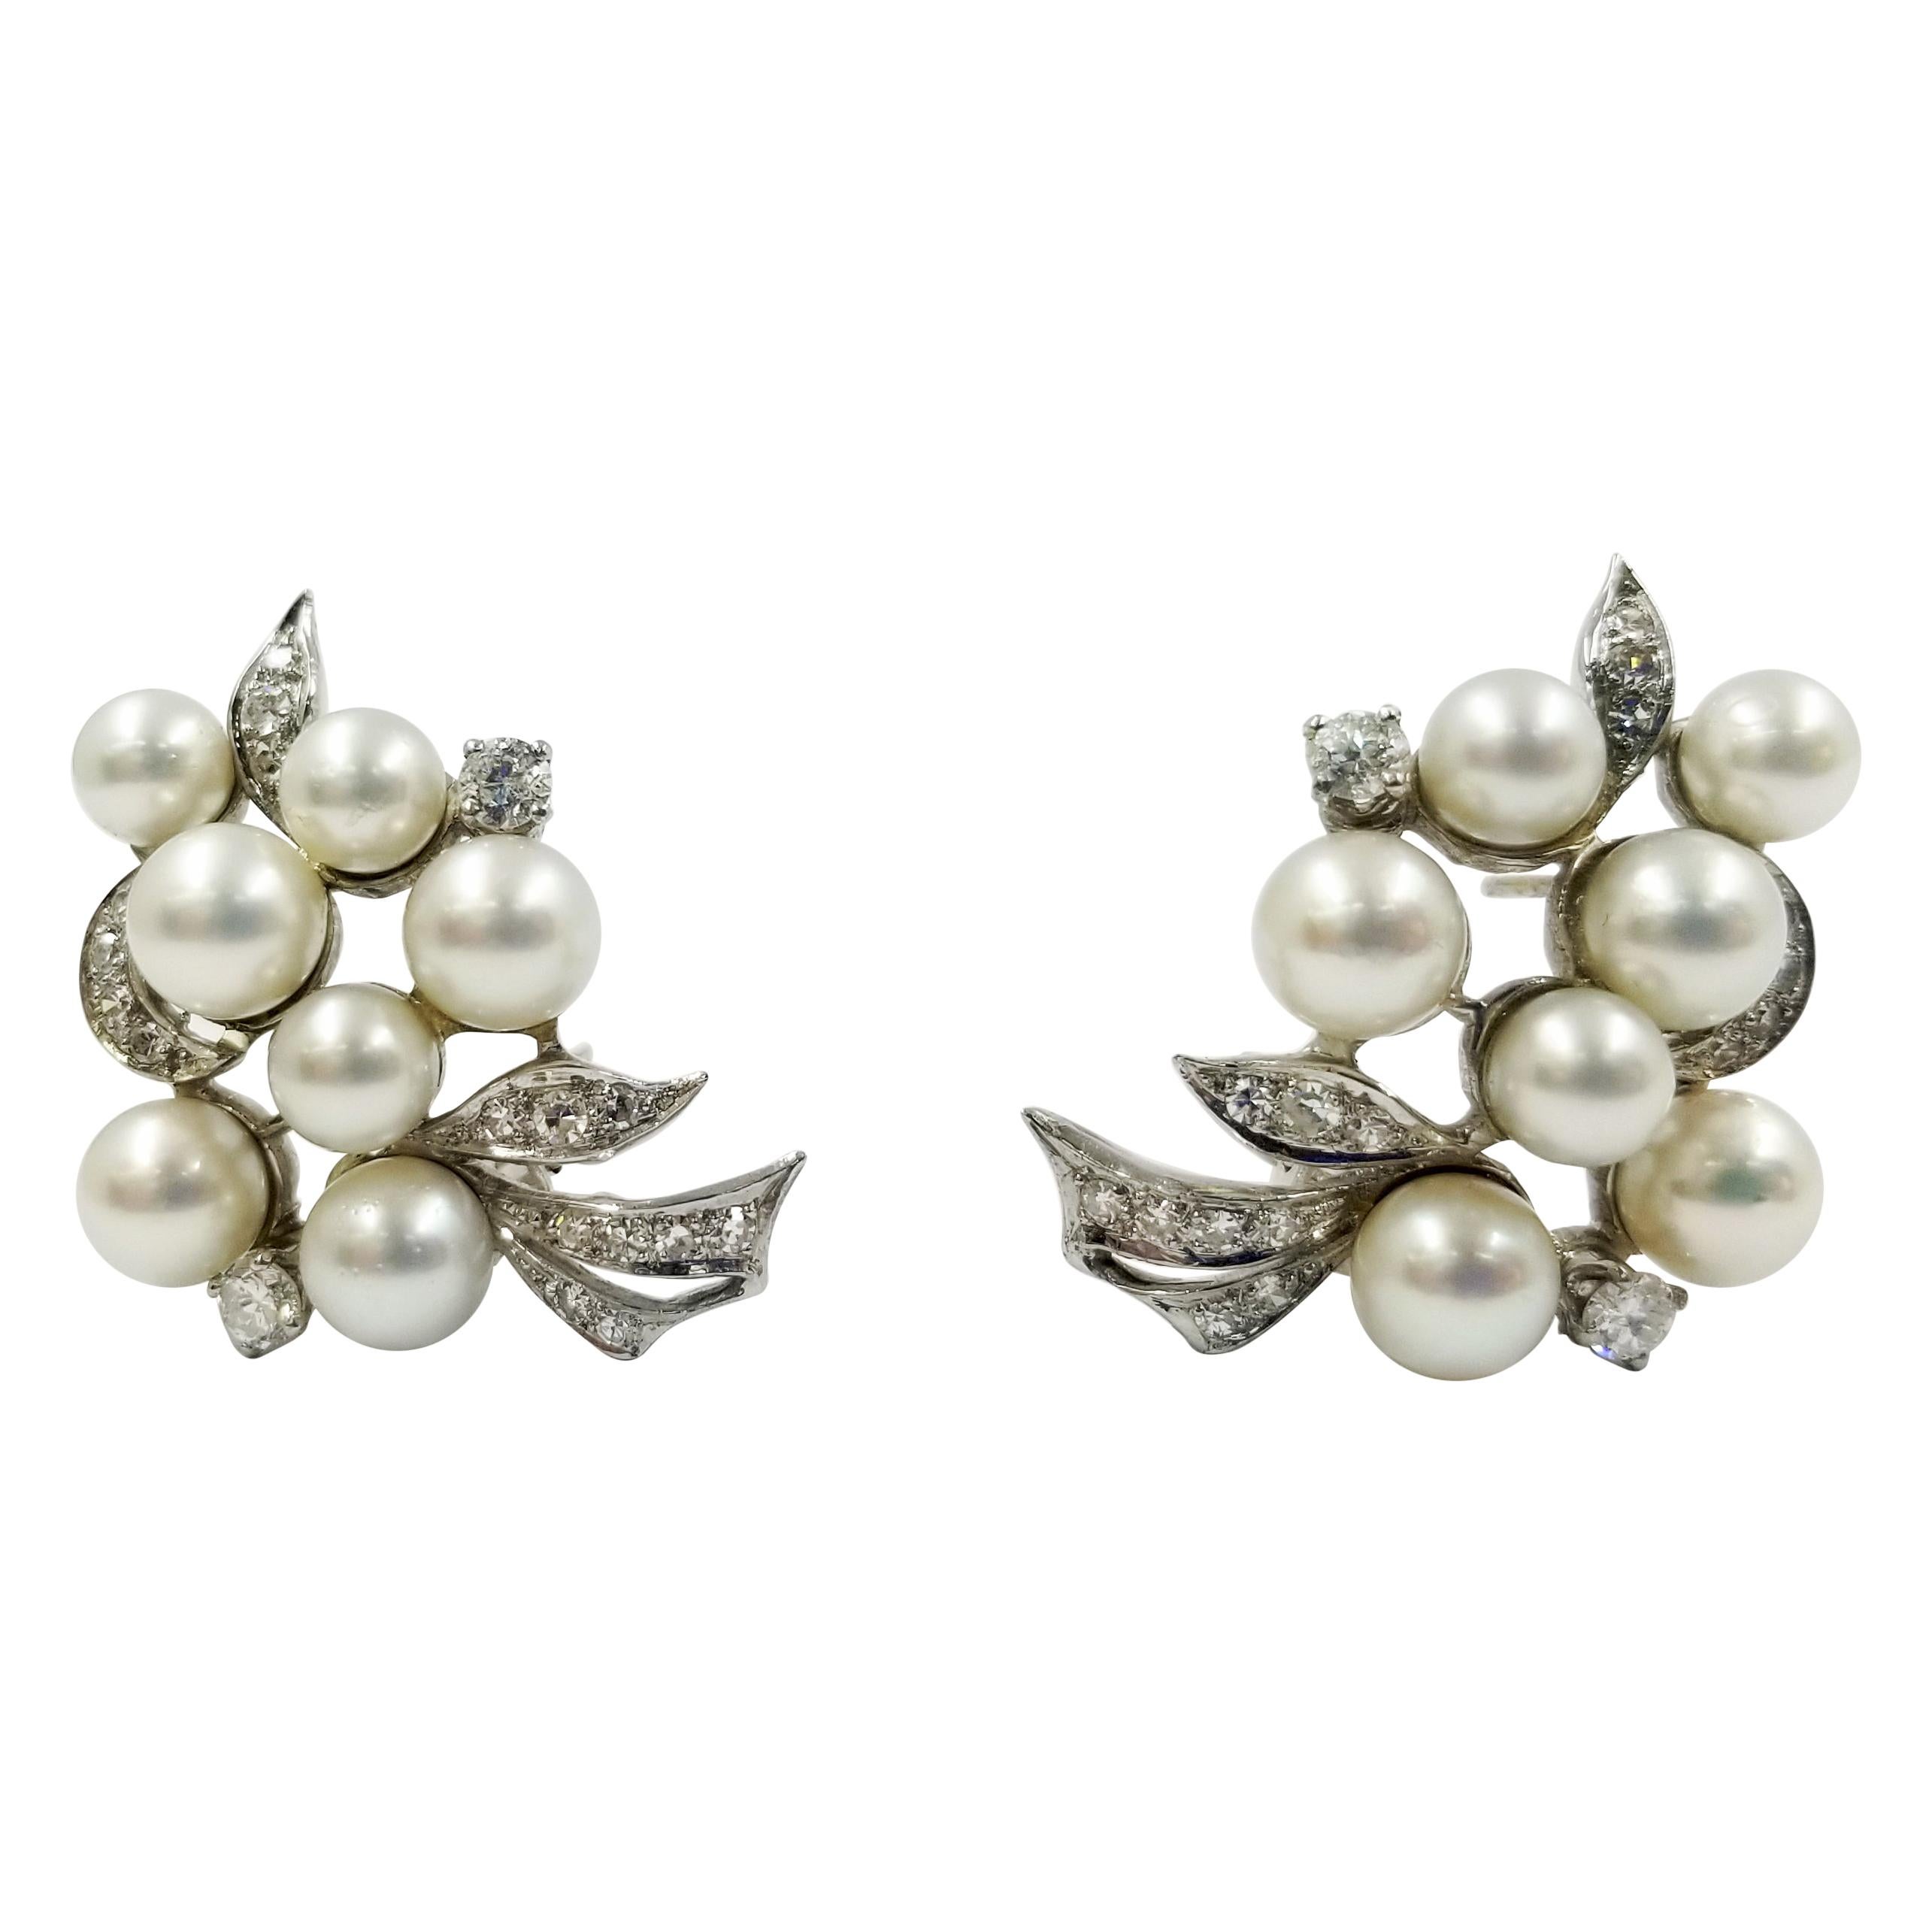 Vintage Cultured Pearl and Diamond Cluster Earrings